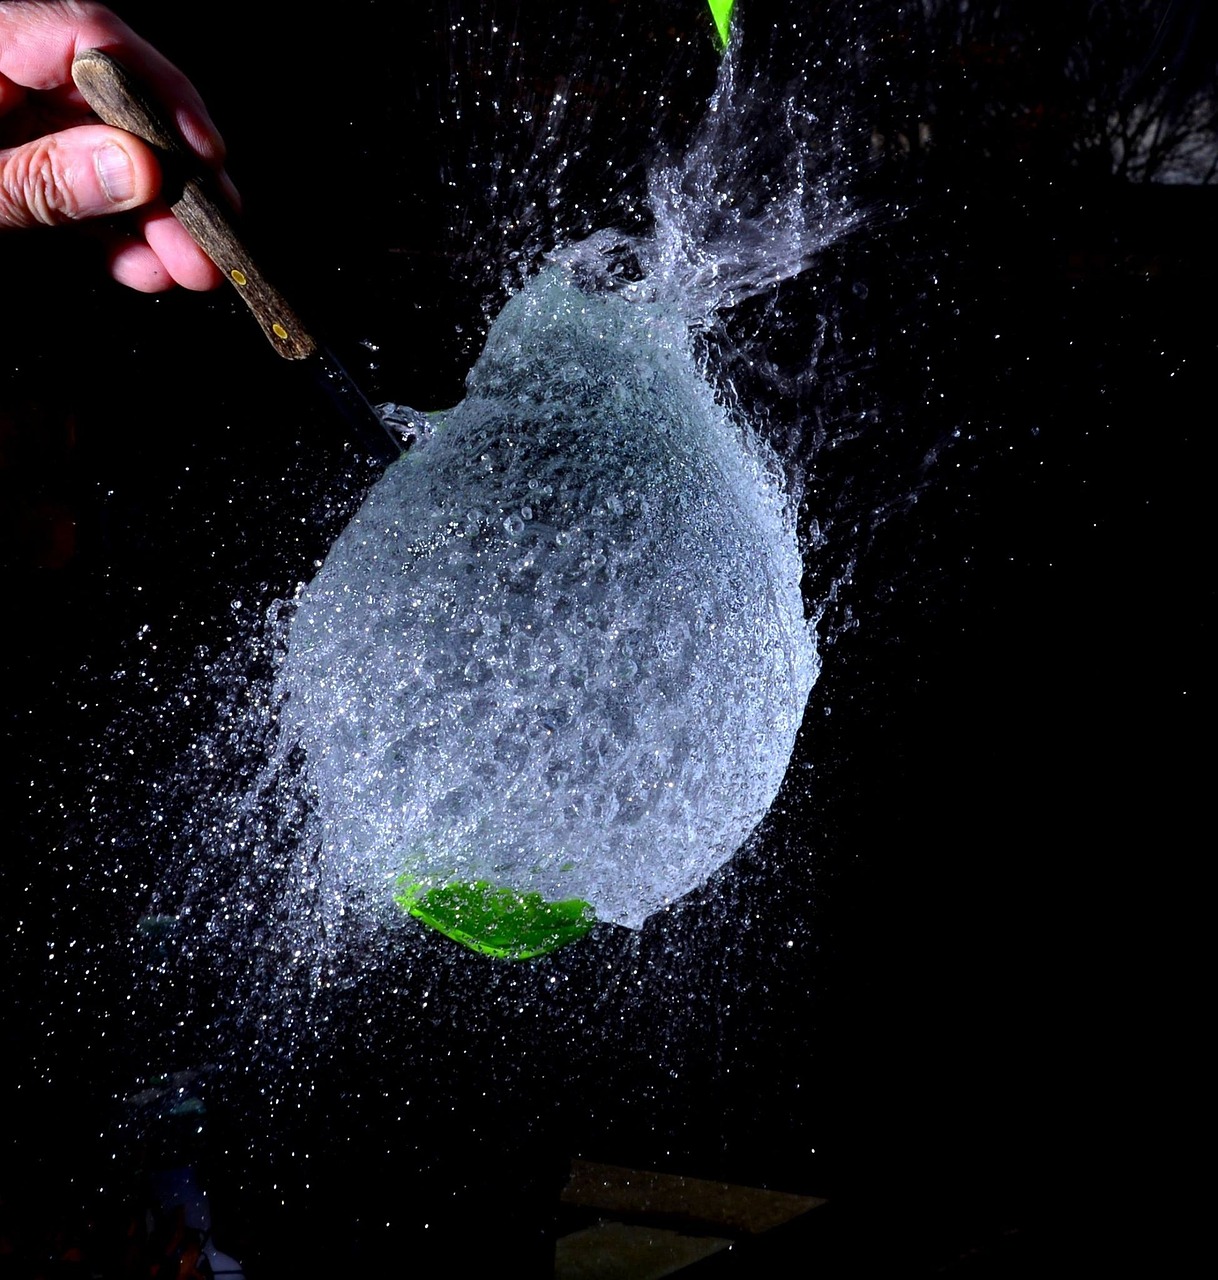 a person splashing water on a green leaf, a picture, flickr, plasticien, magic frozen ice phoenix egg, powdered sugar, flash photography at night, closeup shot